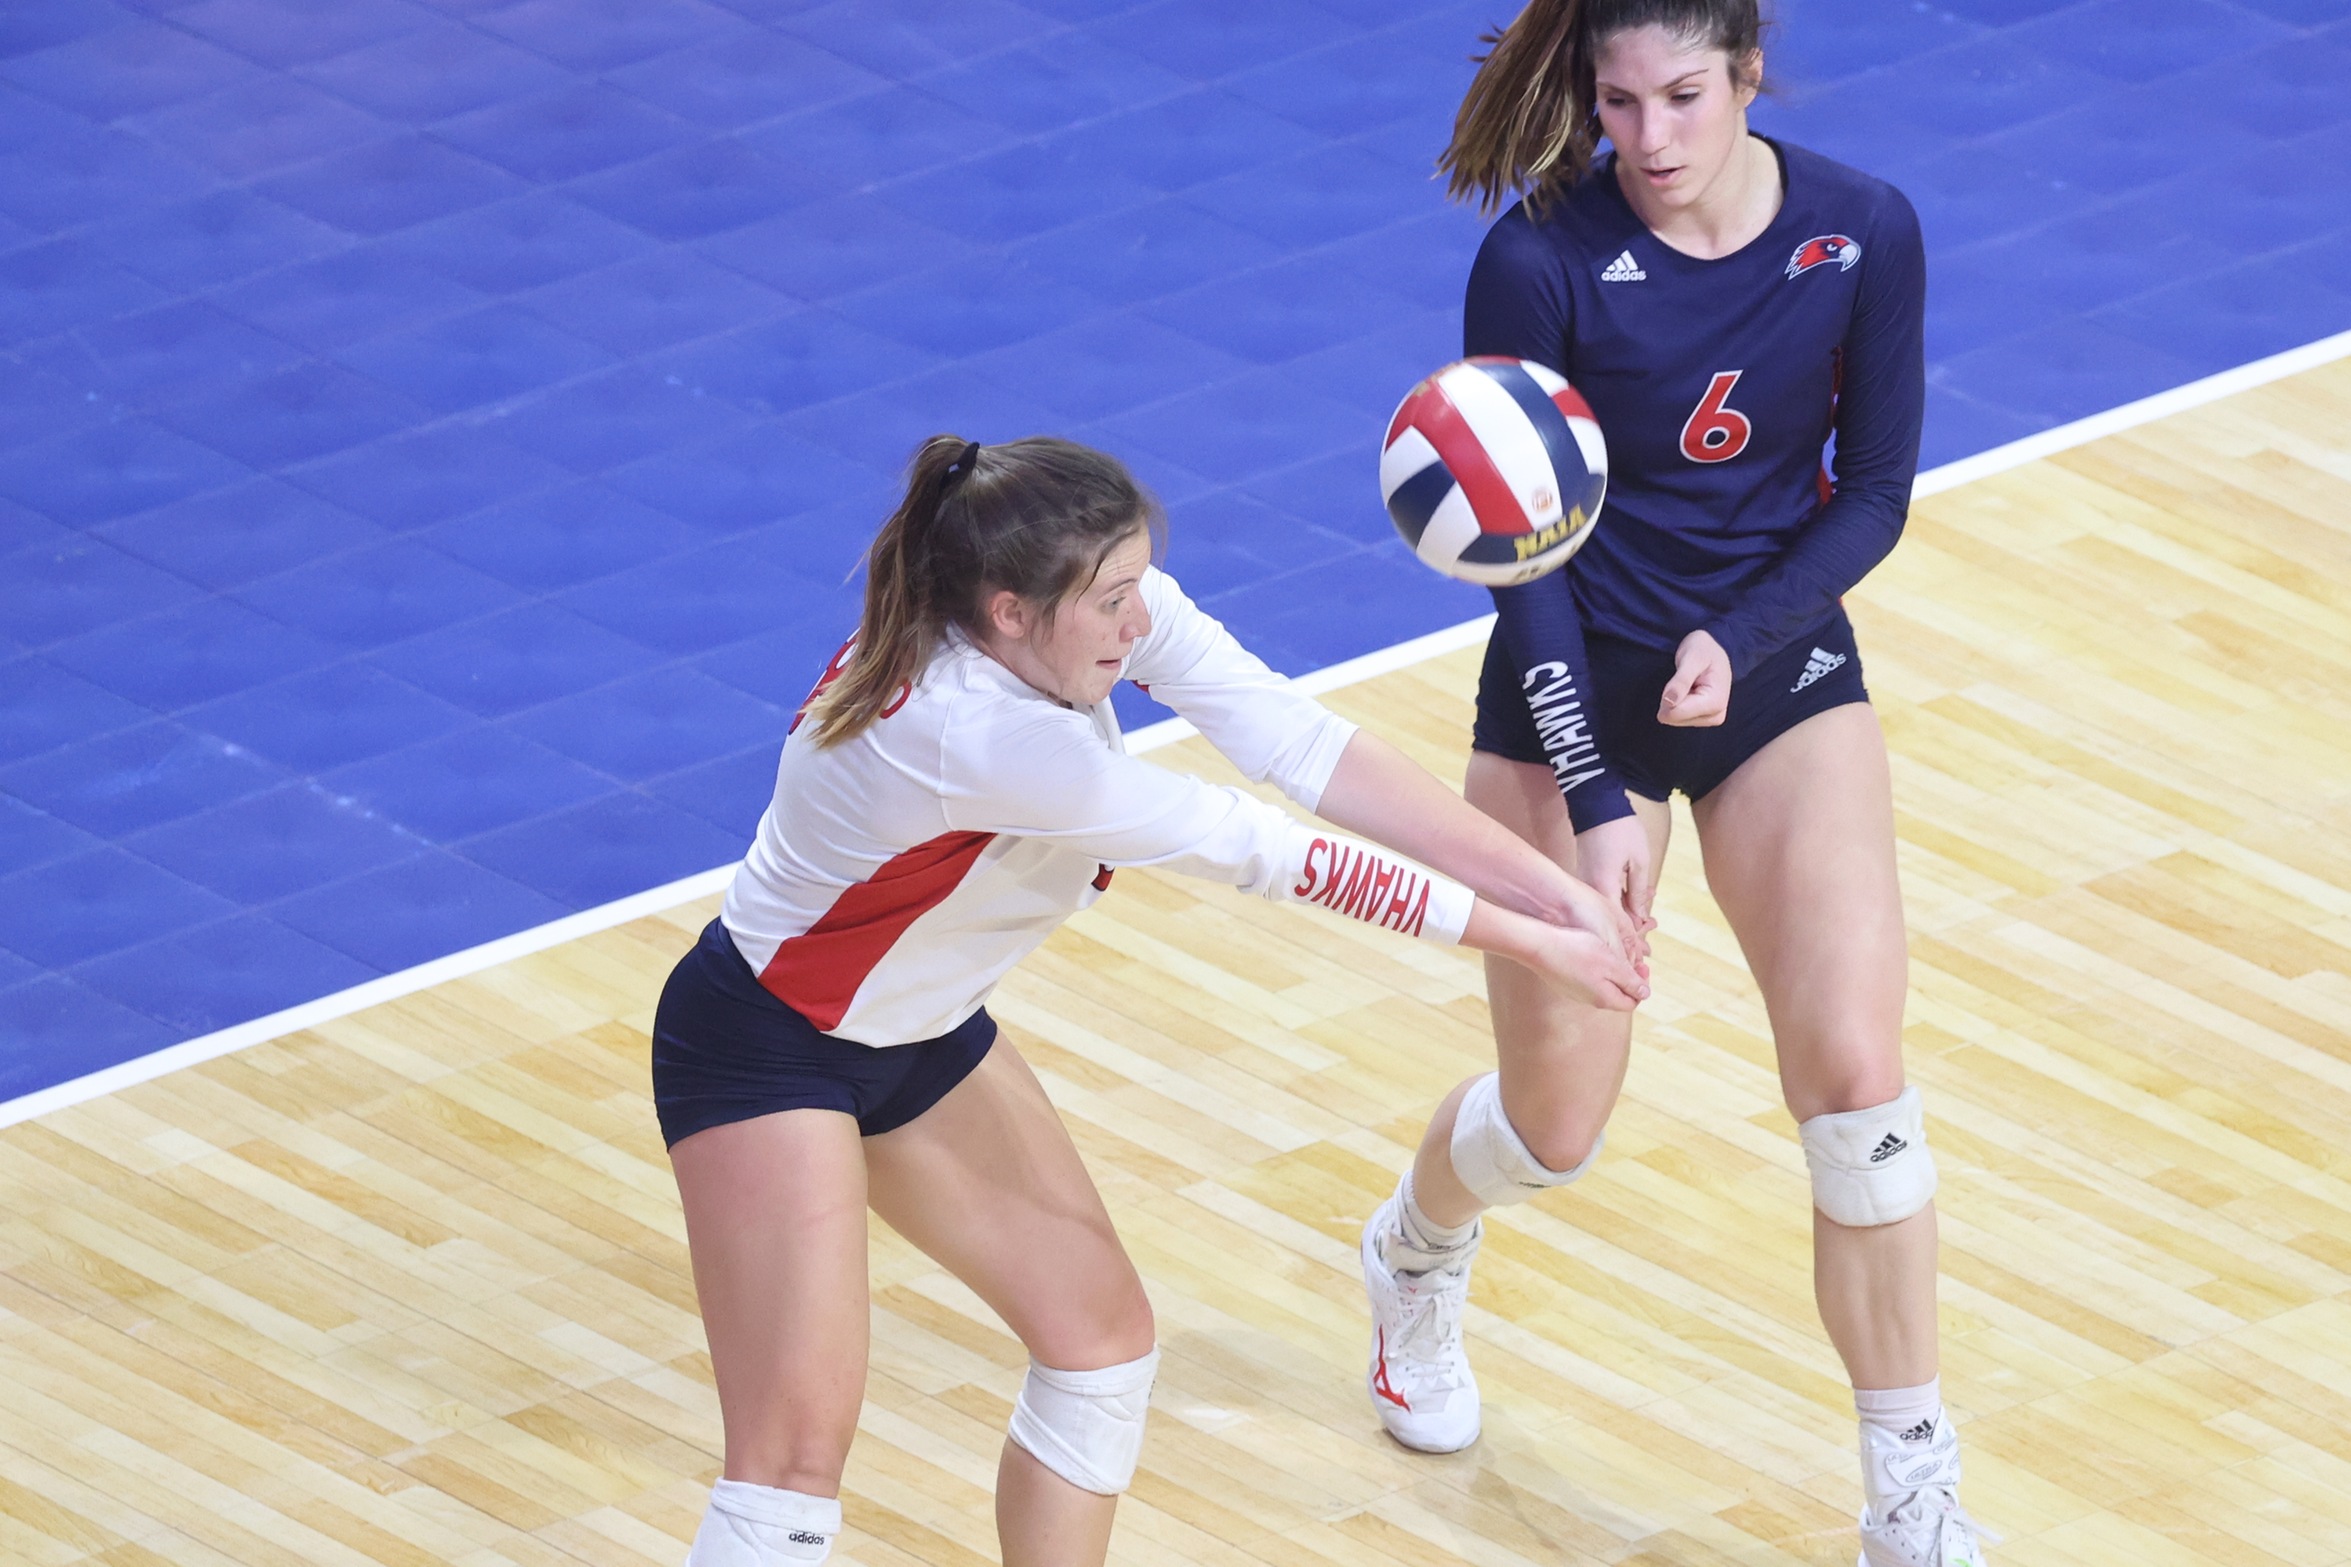 Volleyball Releases 2022 Schedule